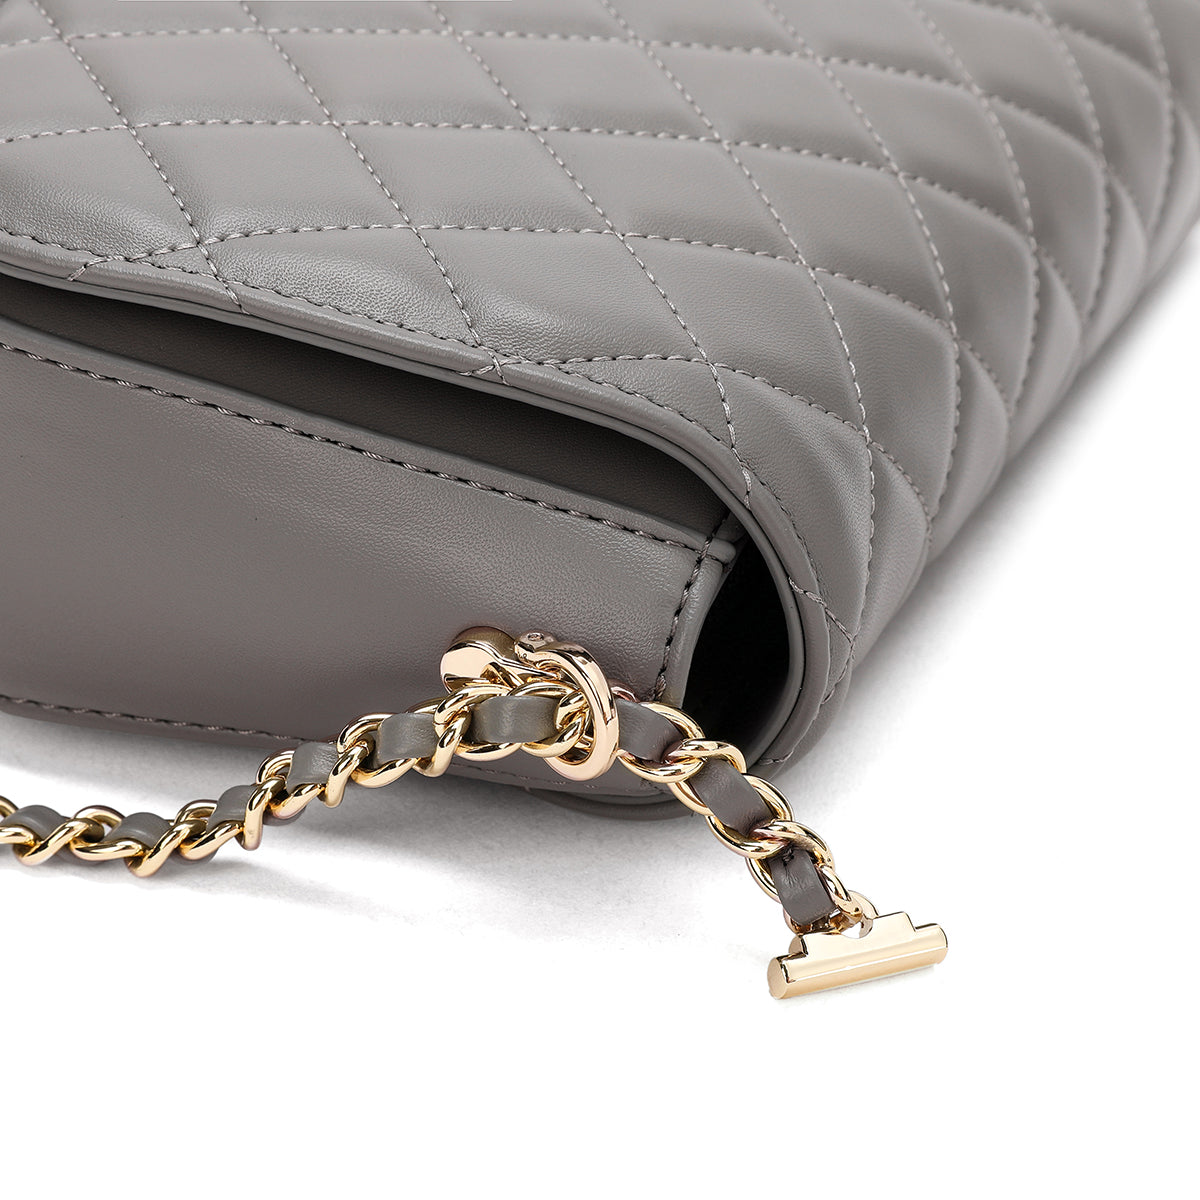 An elegant and practical handbag with an attractive golden chain 23.5 cm wide